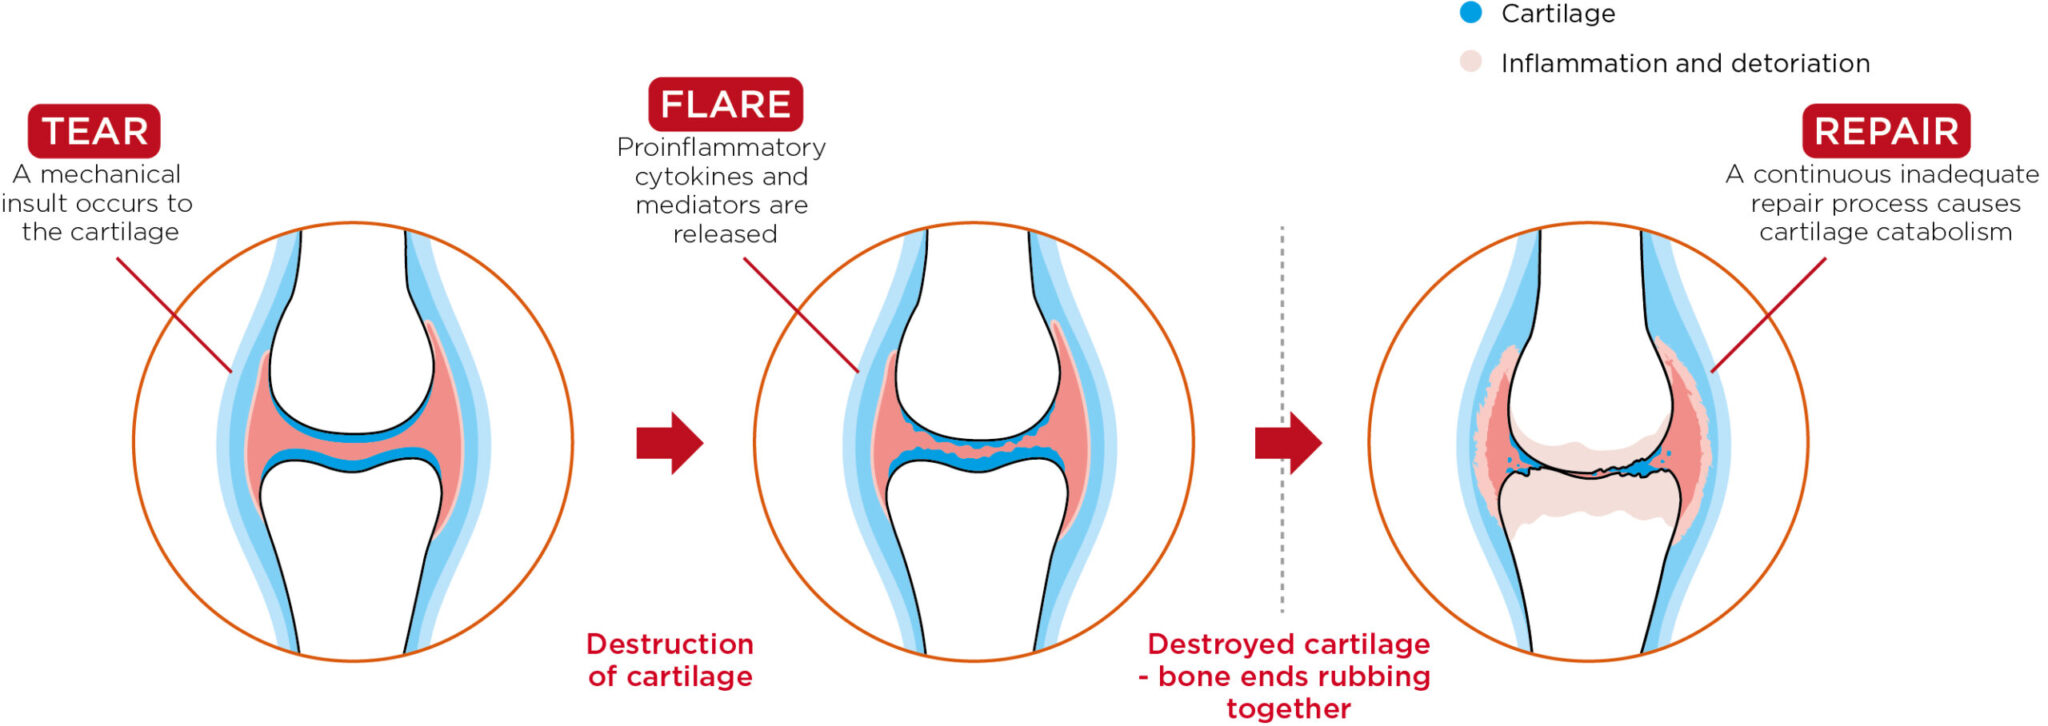 An illustration of the compromised joint repair process